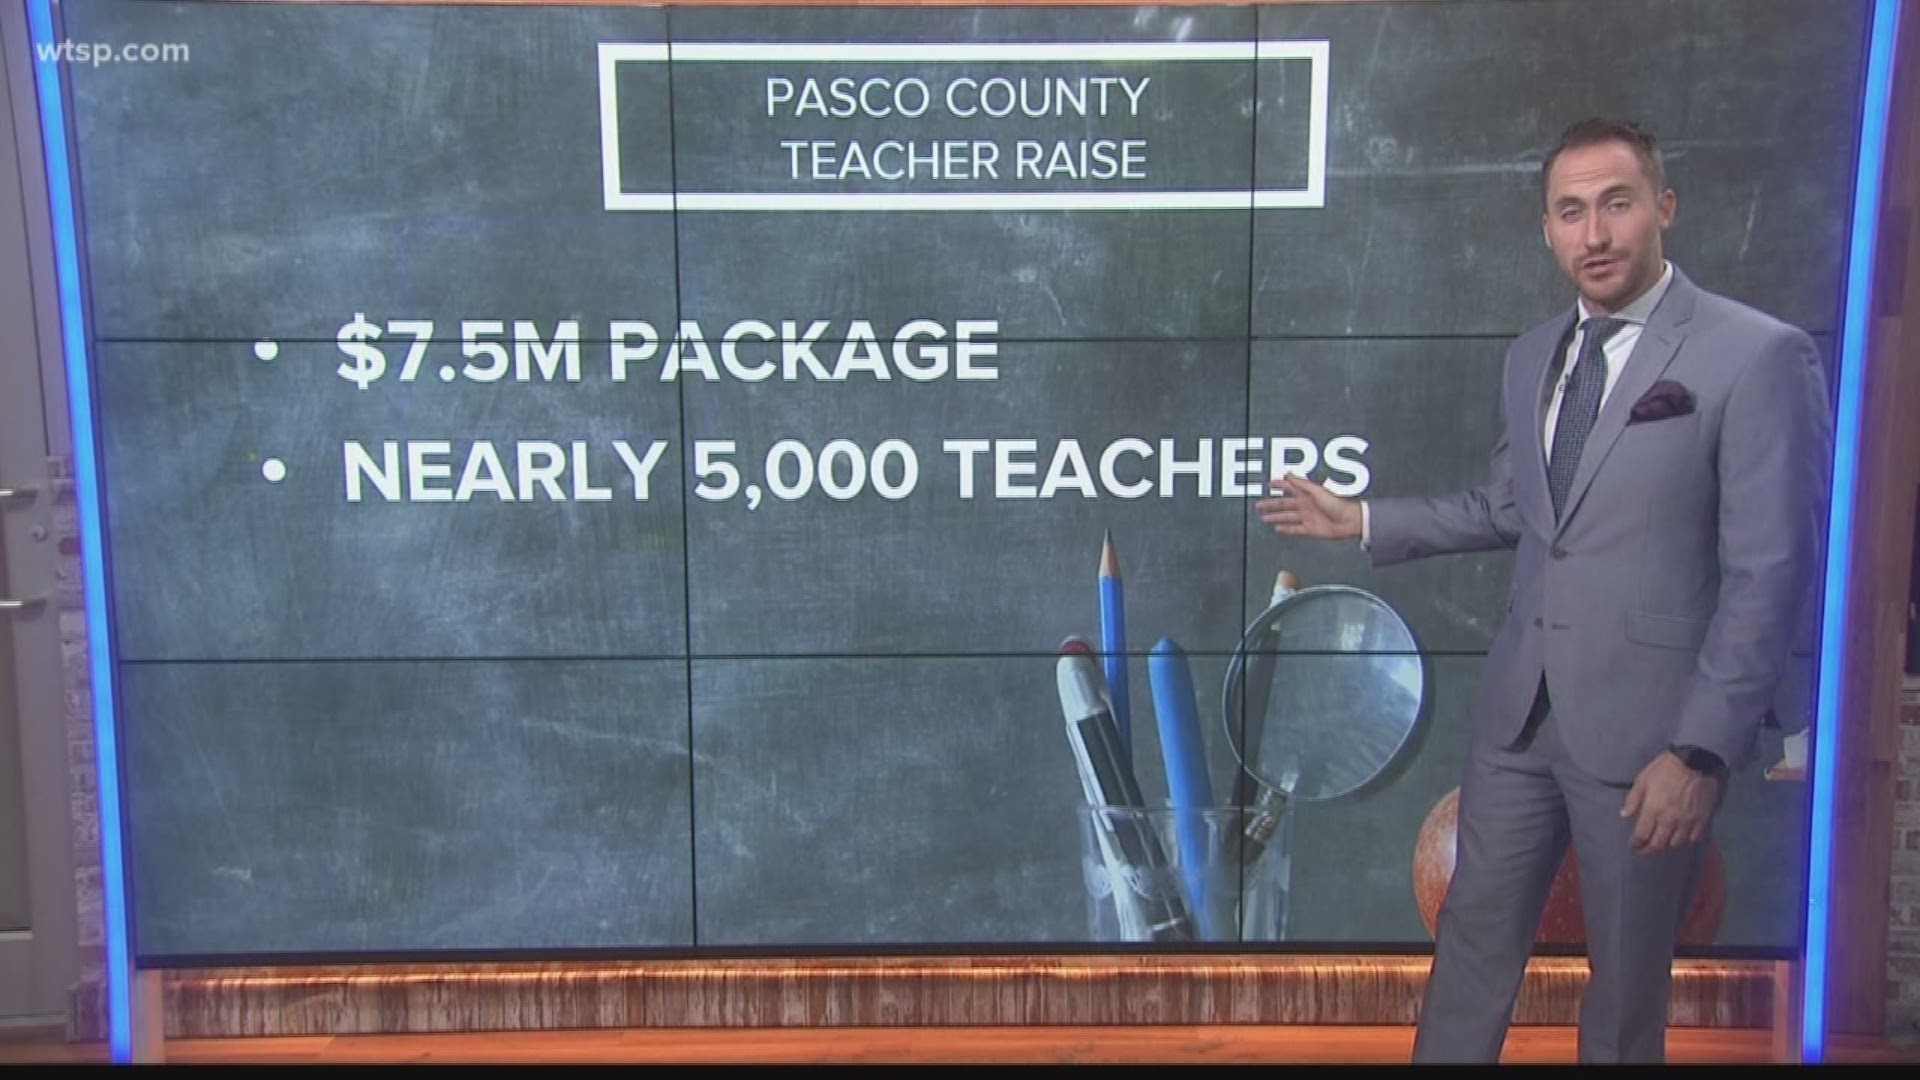 The plan includes 3.25 percent pay hikes and continued full-paid health benefits. The package includes an additional $7.5 million for pay to teachers.